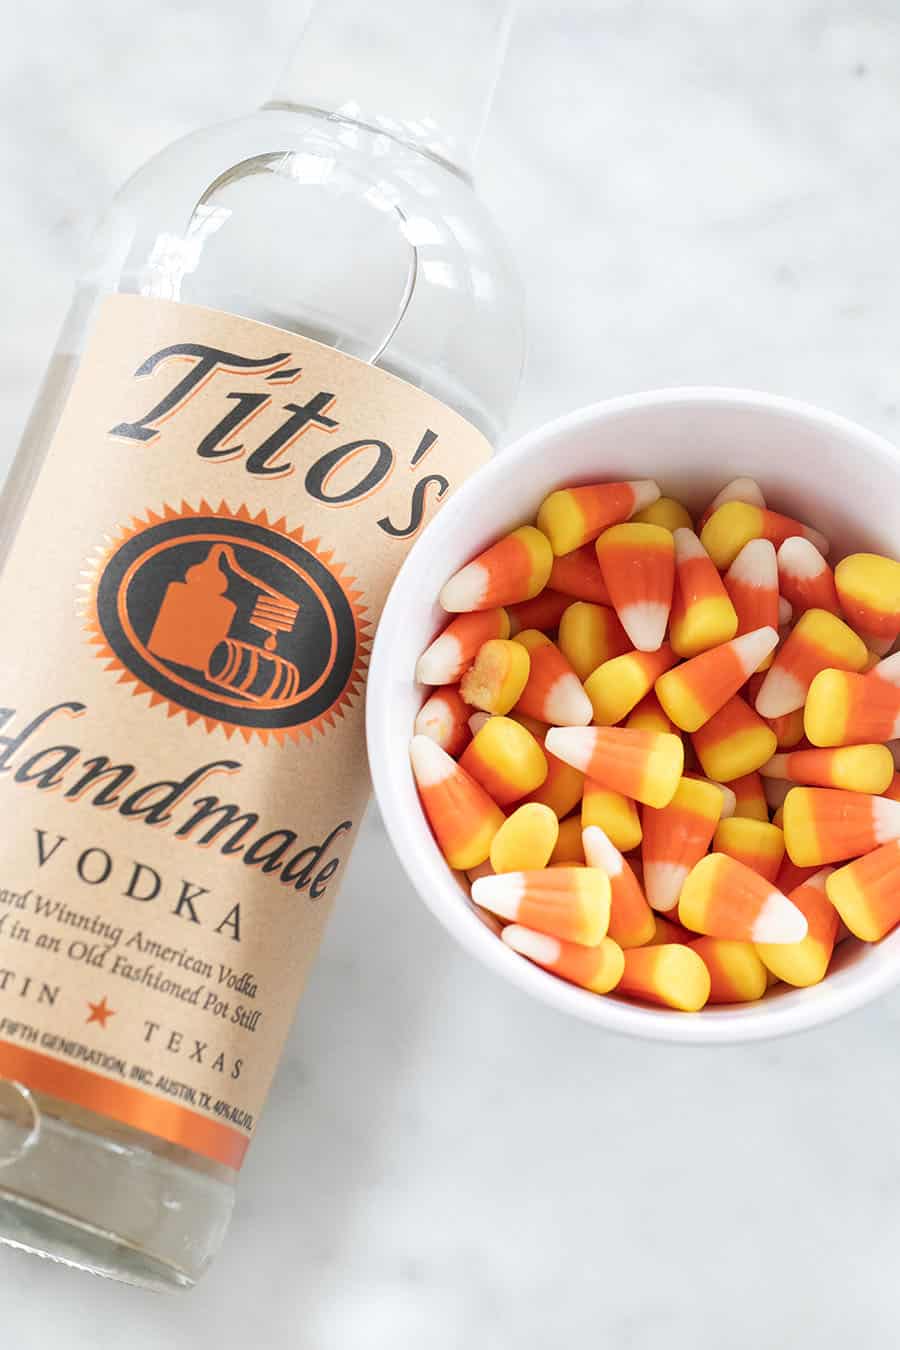 Titos vodka and candy corn.